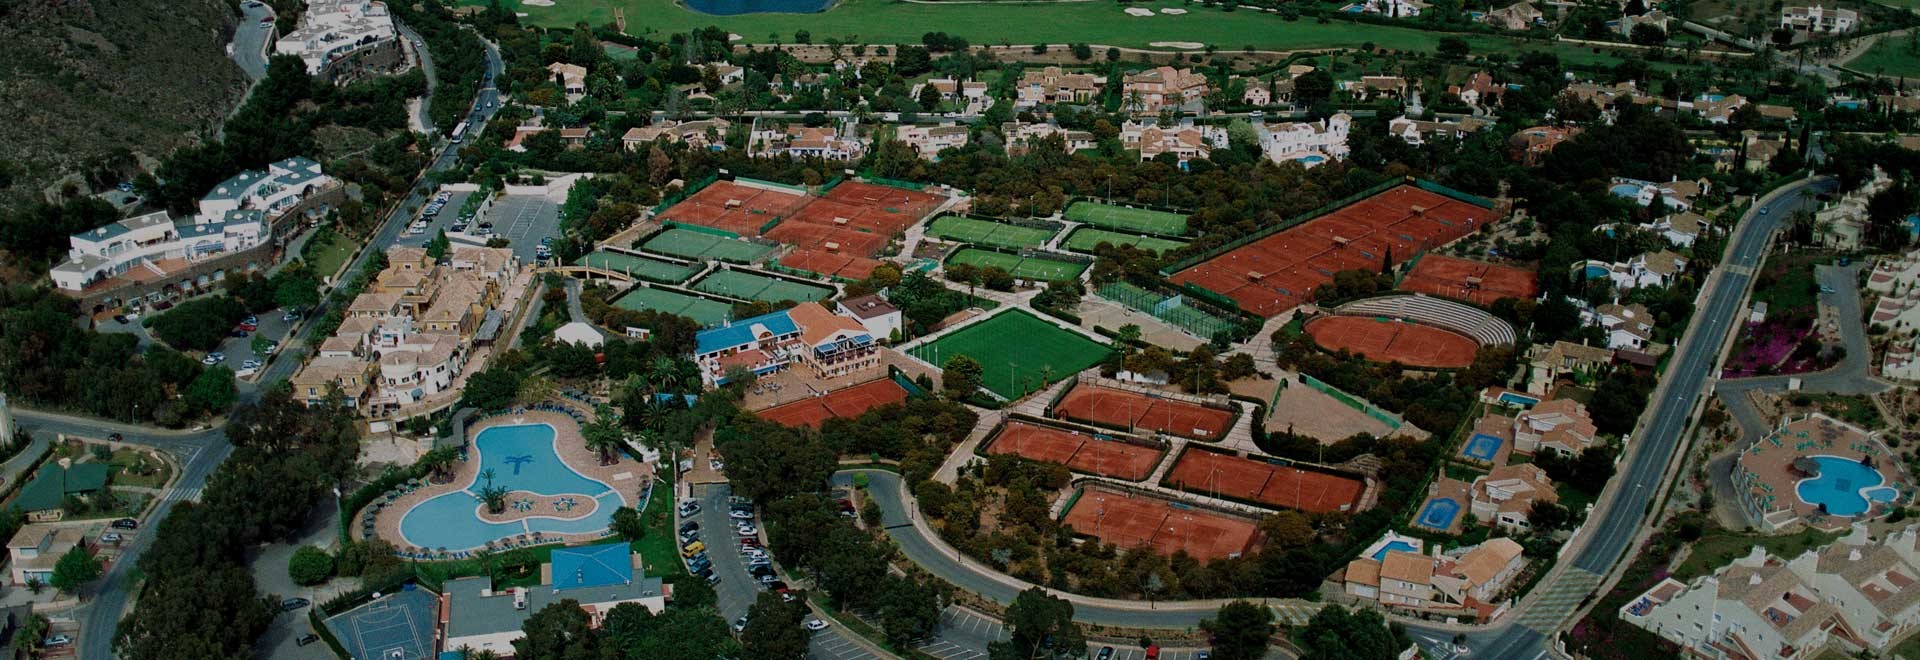 The Top Tennis Academies in the World - High performance outcomes or fun in the sun? This list has got it all!